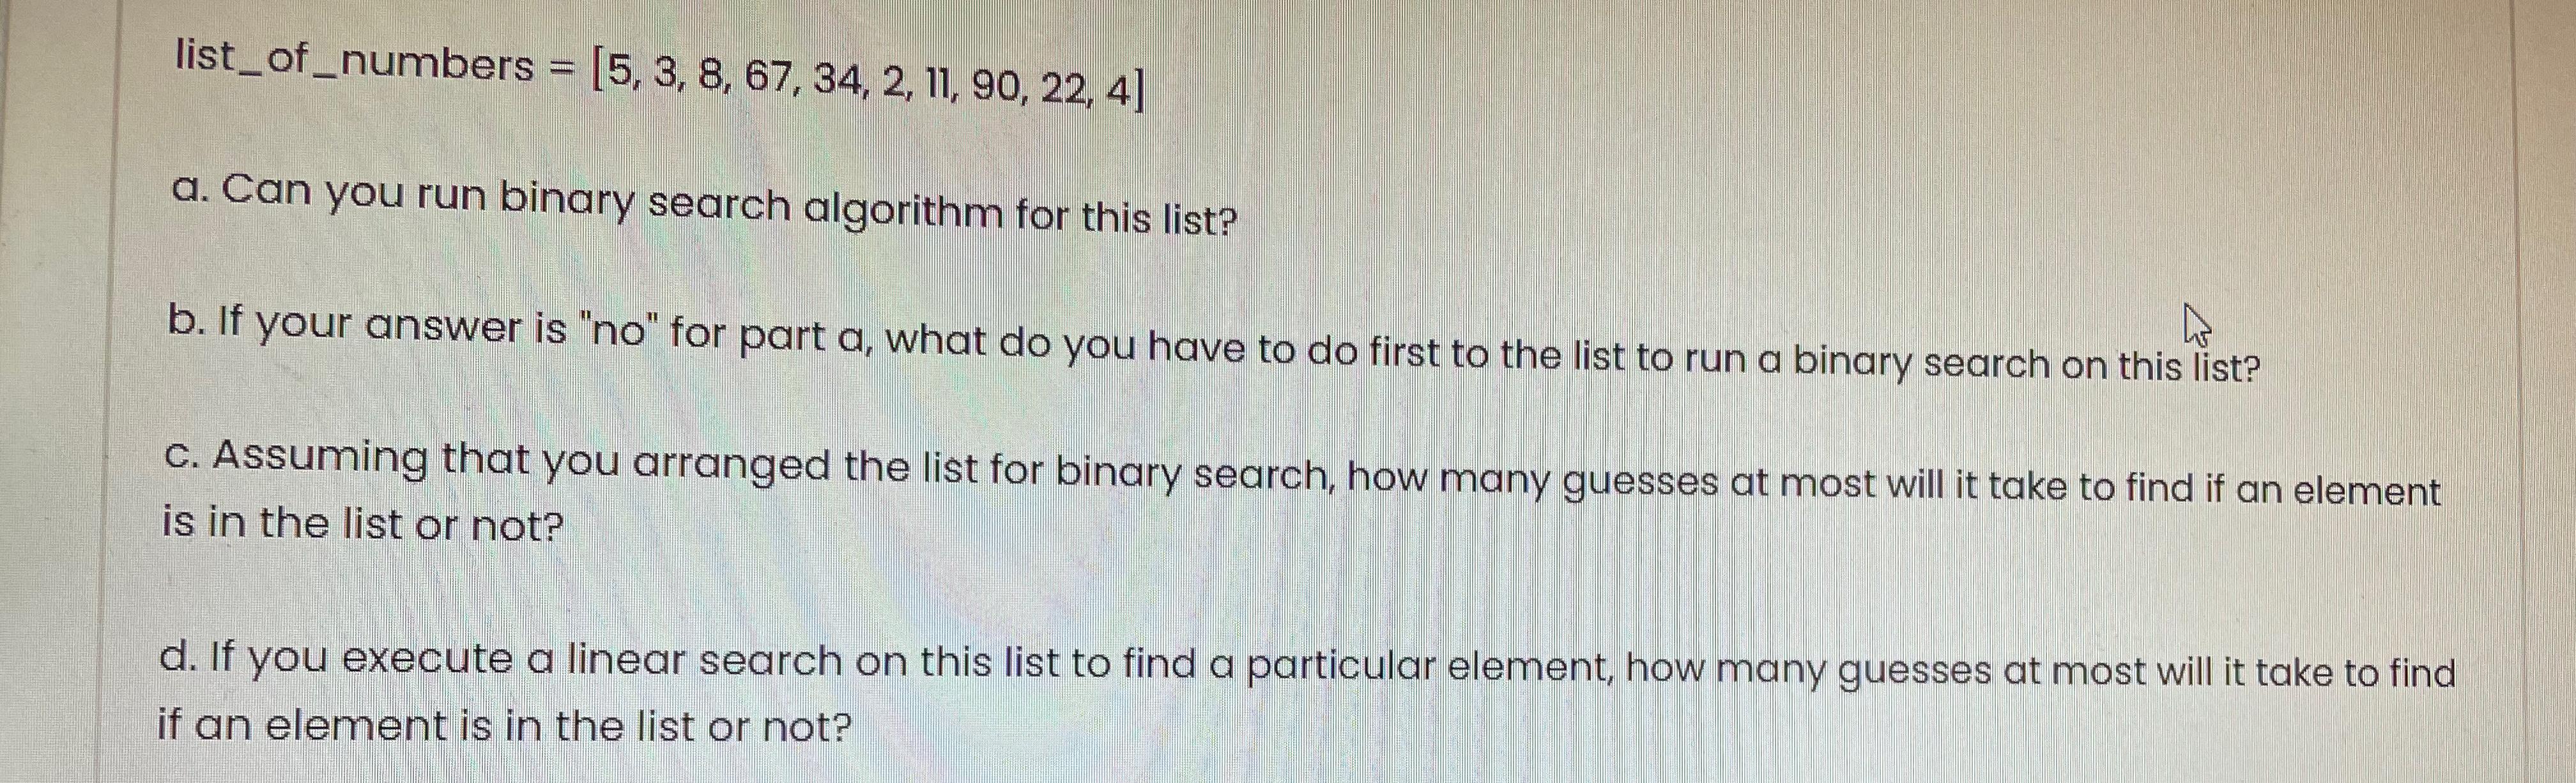 list_of_numbers = [5, 3, 8, 67, 34, 2, 11, 90, 22, 4] a. Can you run binary search algorithm for this list? 4